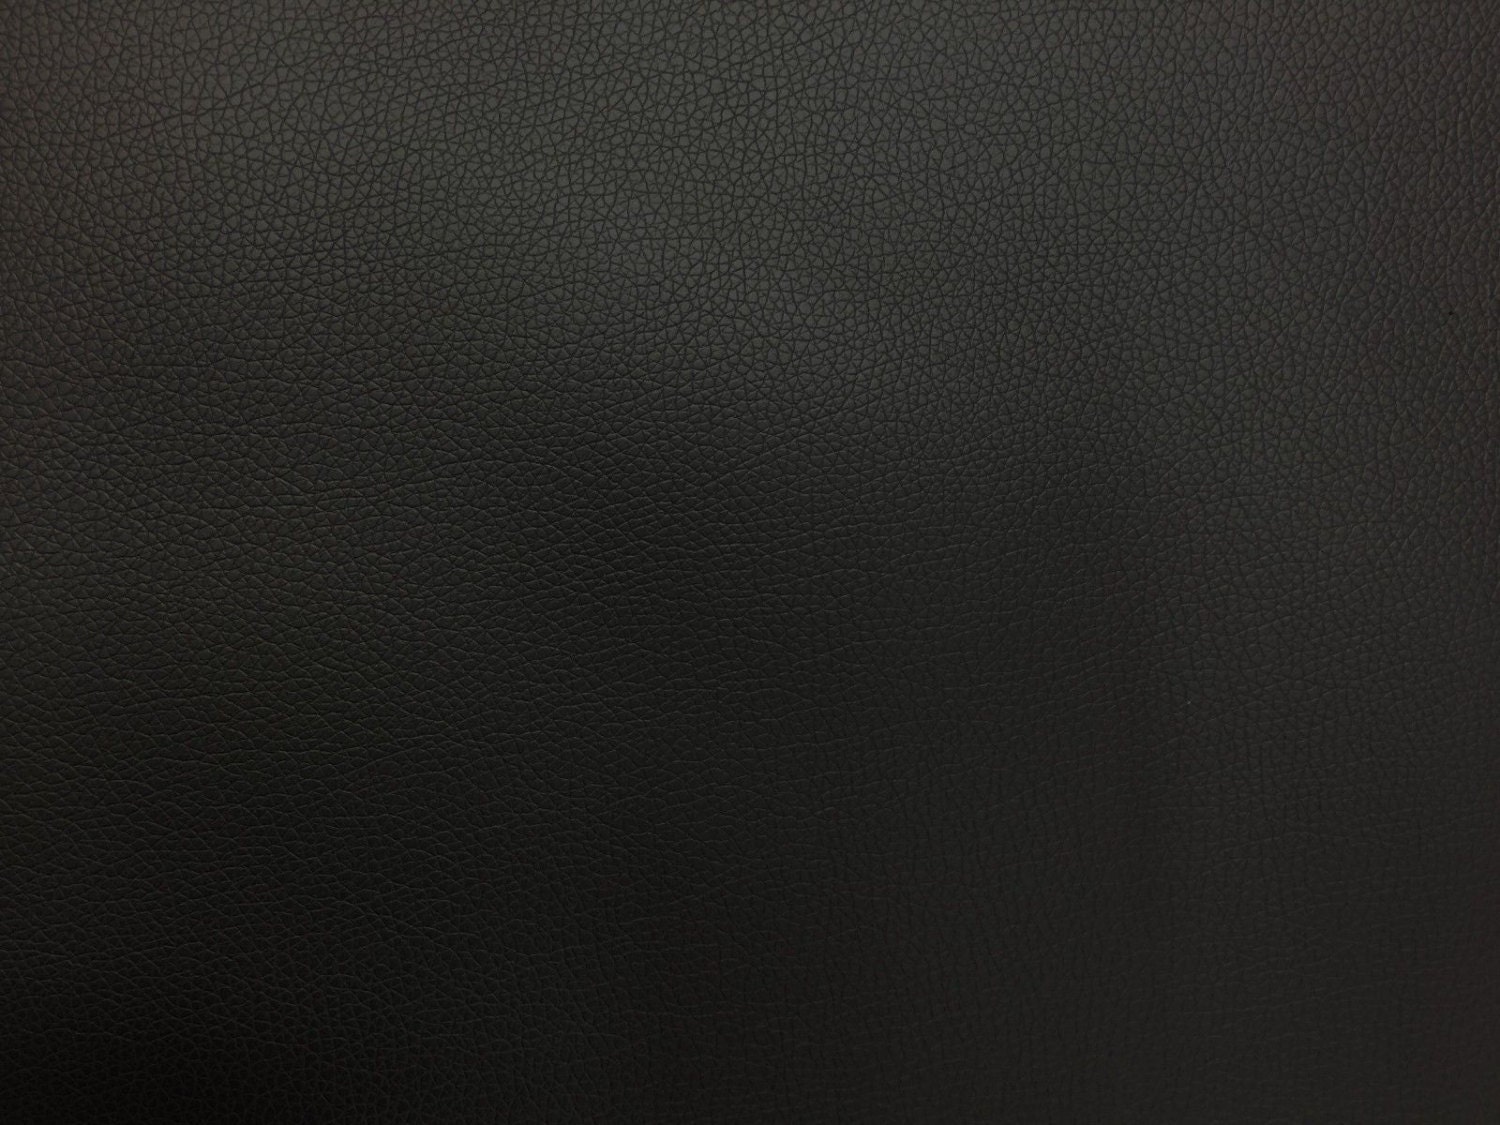 Black Rosette Faux Leather Vinyl 54 Wide Upholstery Fabric by the Yard